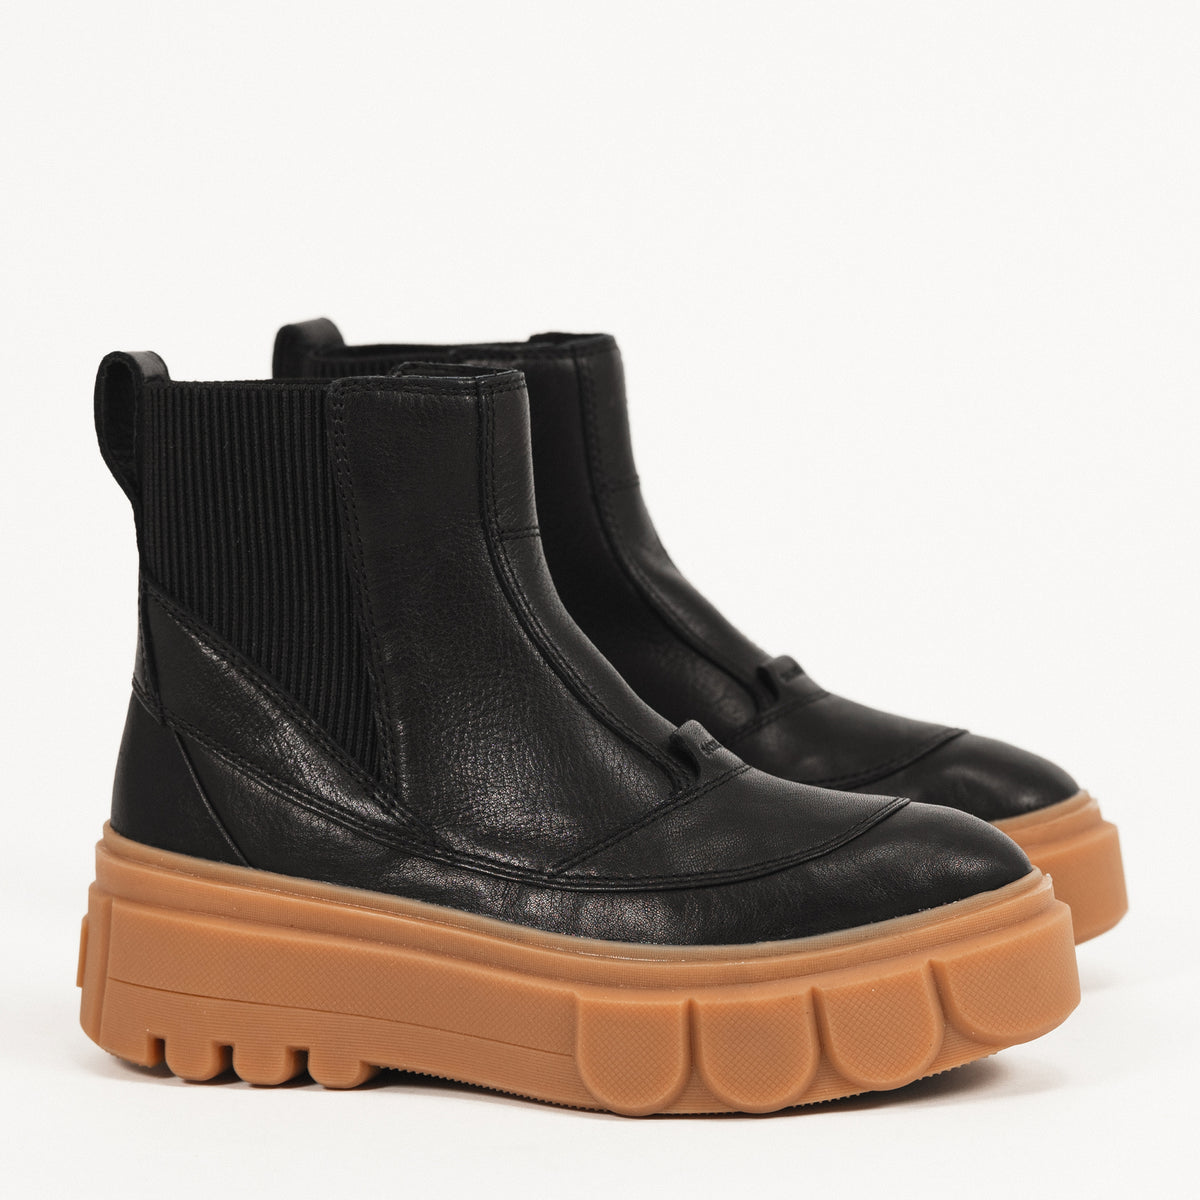 CARIBOU X BOOT CHELSEA - BLACK - LEATHER